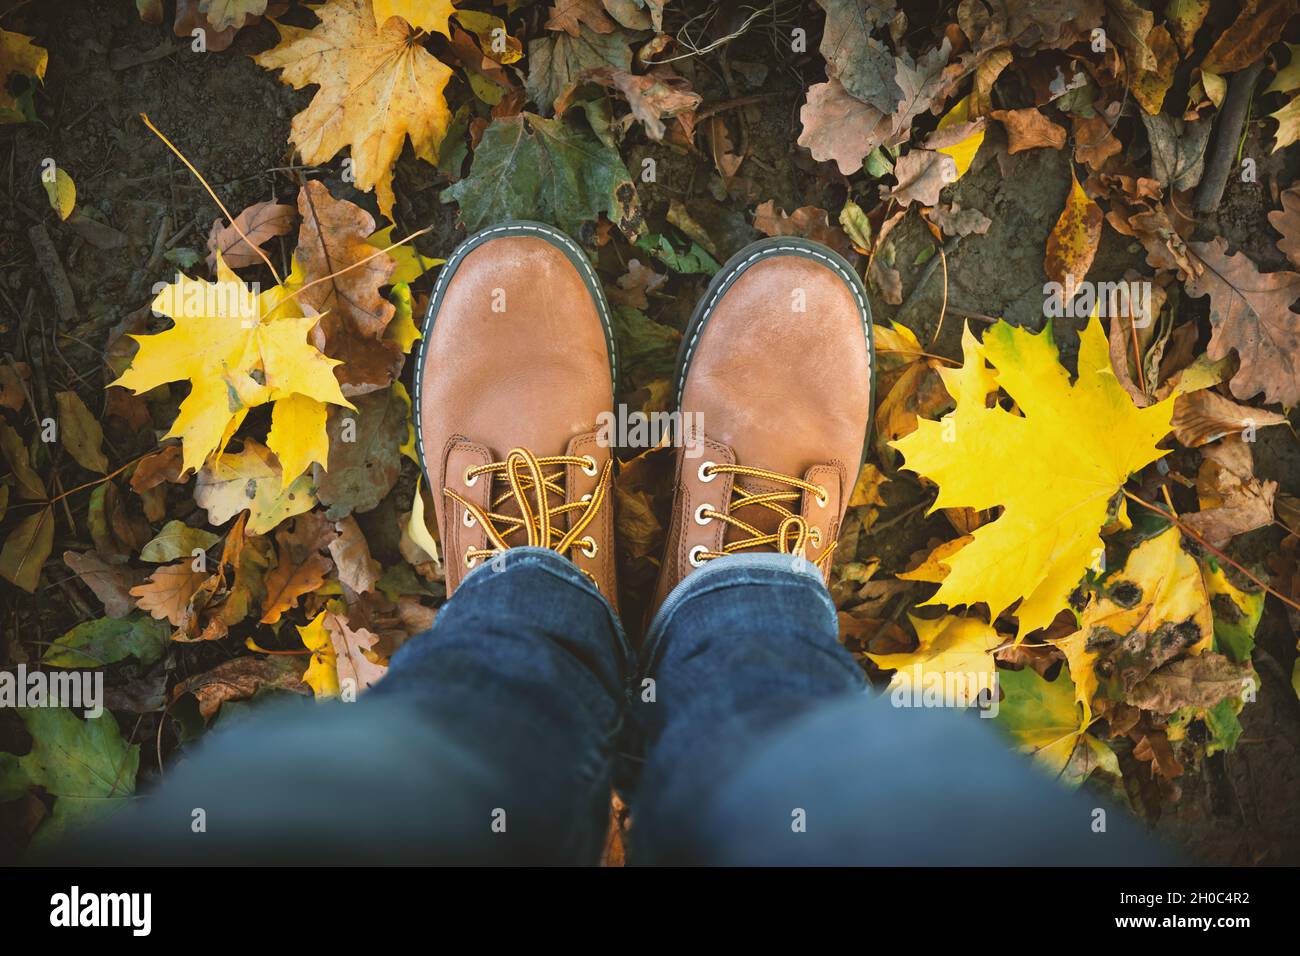 Man legs in jeans and brown leather boots on park ground with colorful fallen maple leaves around. Concept of fall autumn season and trendy hipster lifestyle Stock Photo